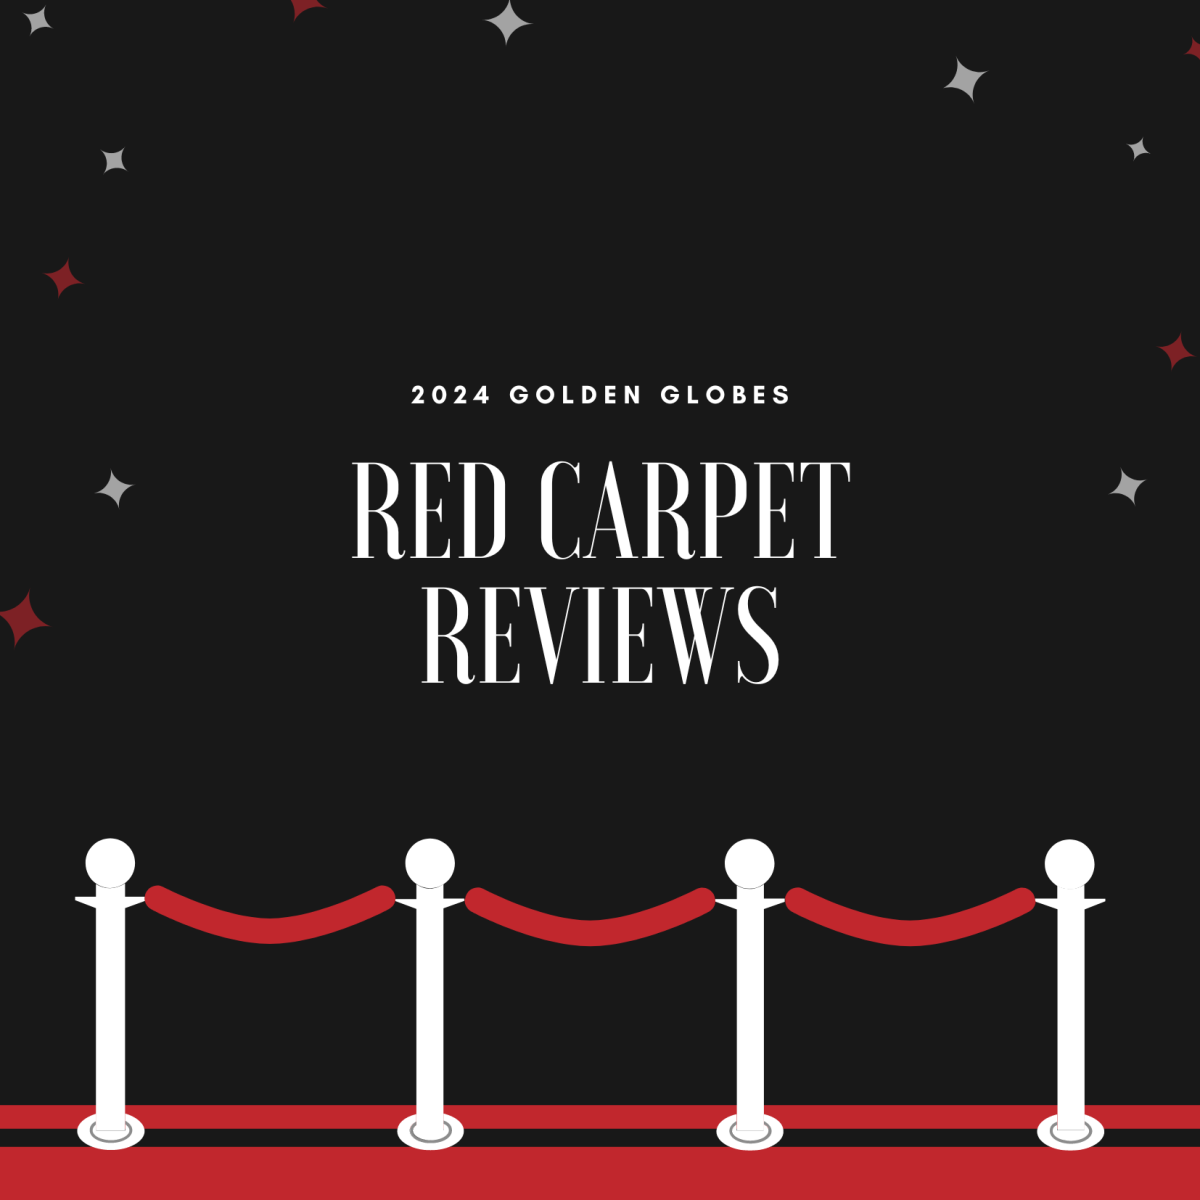 Reviews of celebrities outfits on the 2024 Golden Globes red carpet.